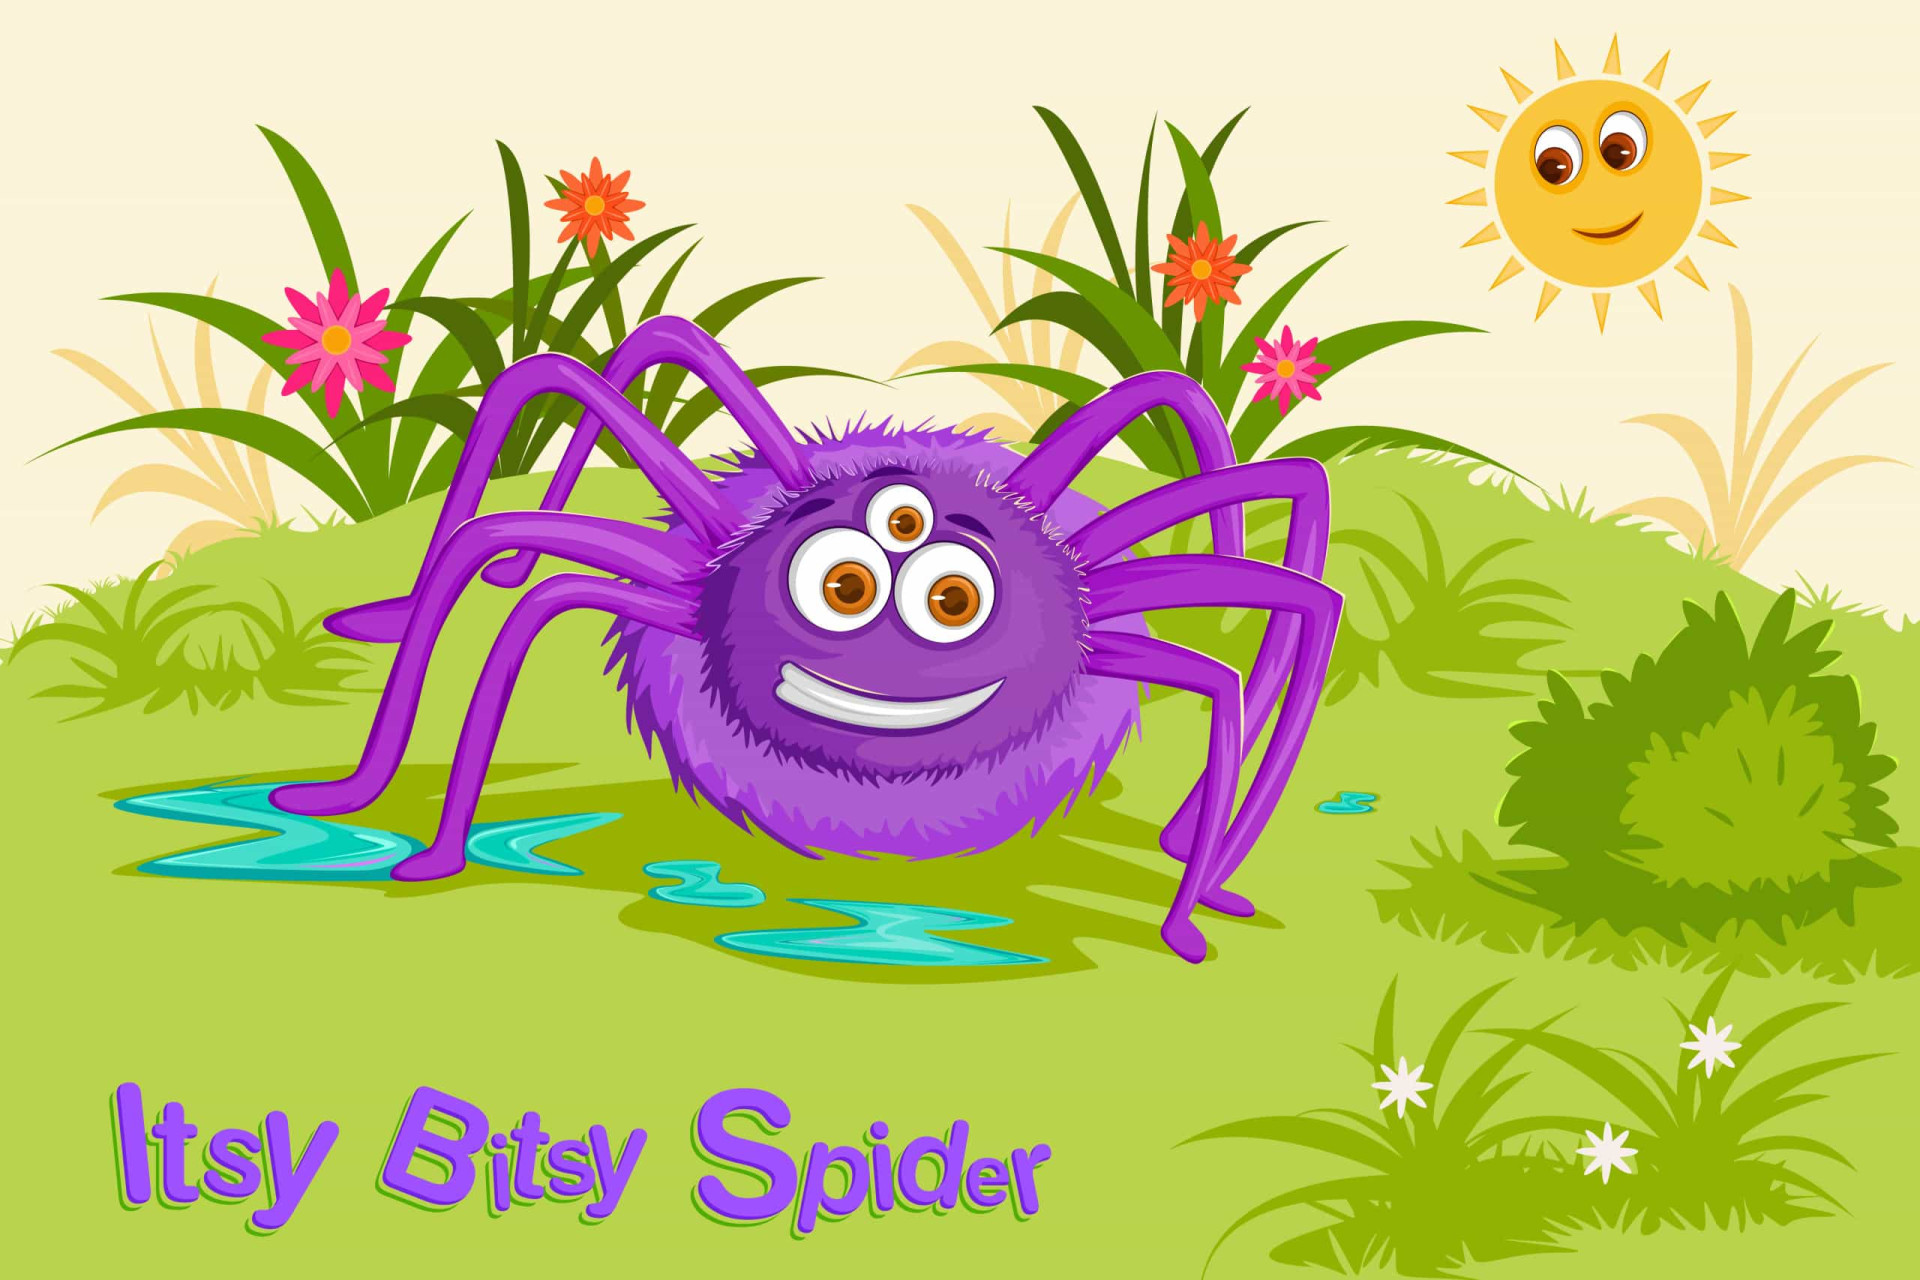 <p>Many of us are afraid of spiders, and kids are no exception. This song can help teach kids to understand arachnids better and that they can even be fun!</p><p><a href="https://www.msn.com/en-us/community/channel/vid-7xx8mnucu55yw63we9va2gwr7uihbxwc68fxqp25x6tg4ftibpra?cvid=94631541bc0f4f89bfd59158d696ad7e">Follow us and access great exclusive content every day</a></p>